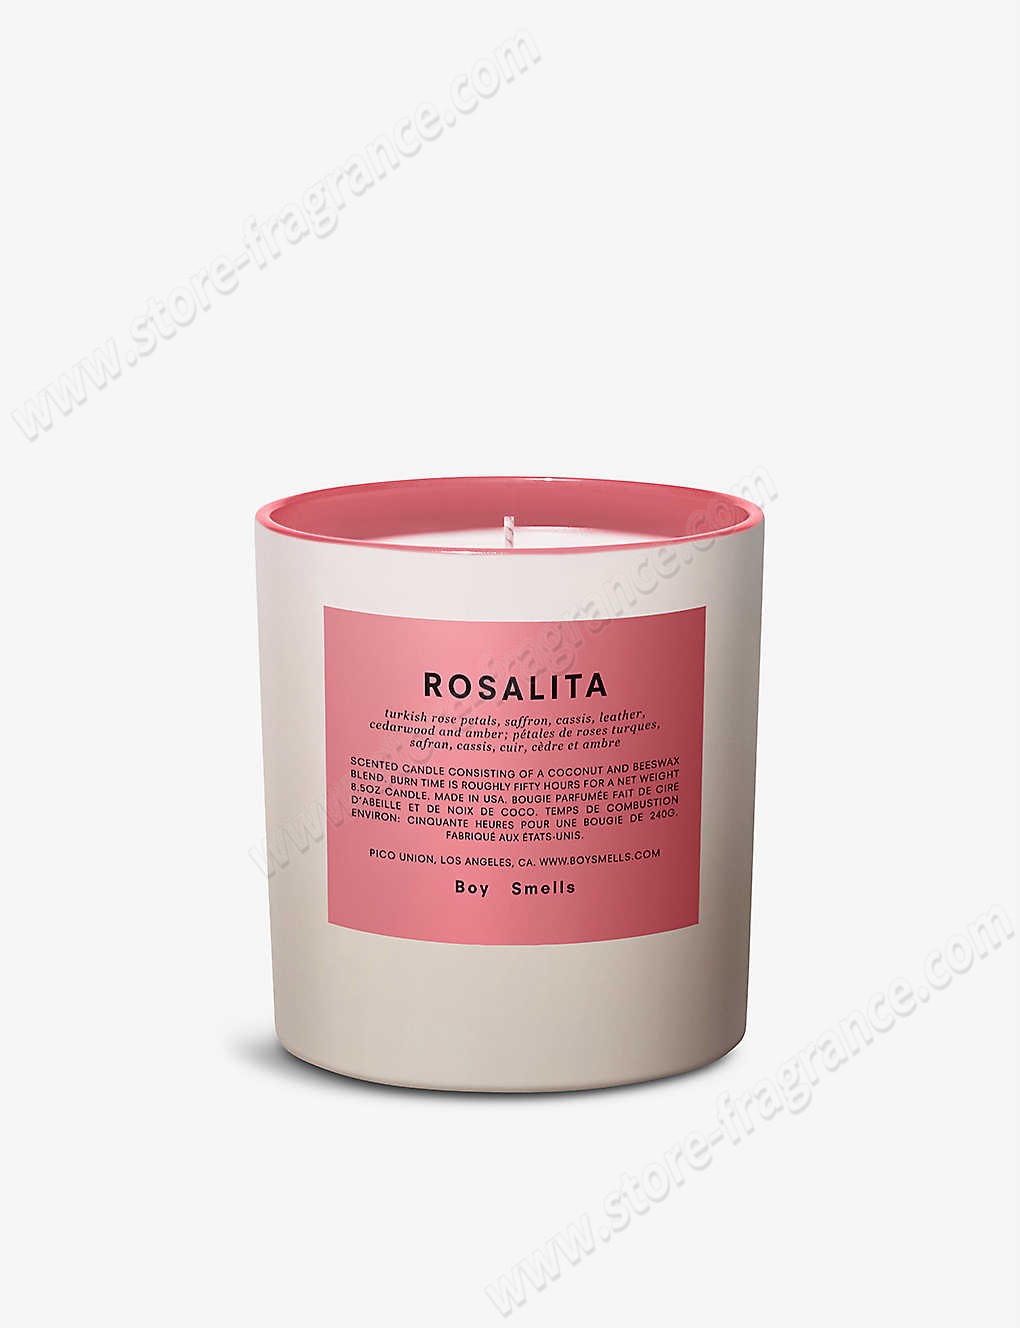 BOY SMELLS/Pride Rosalita scented candle 240g ✿ Discount Store - BOY SMELLS/Pride Rosalita scented candle 240g ✿ Discount Store